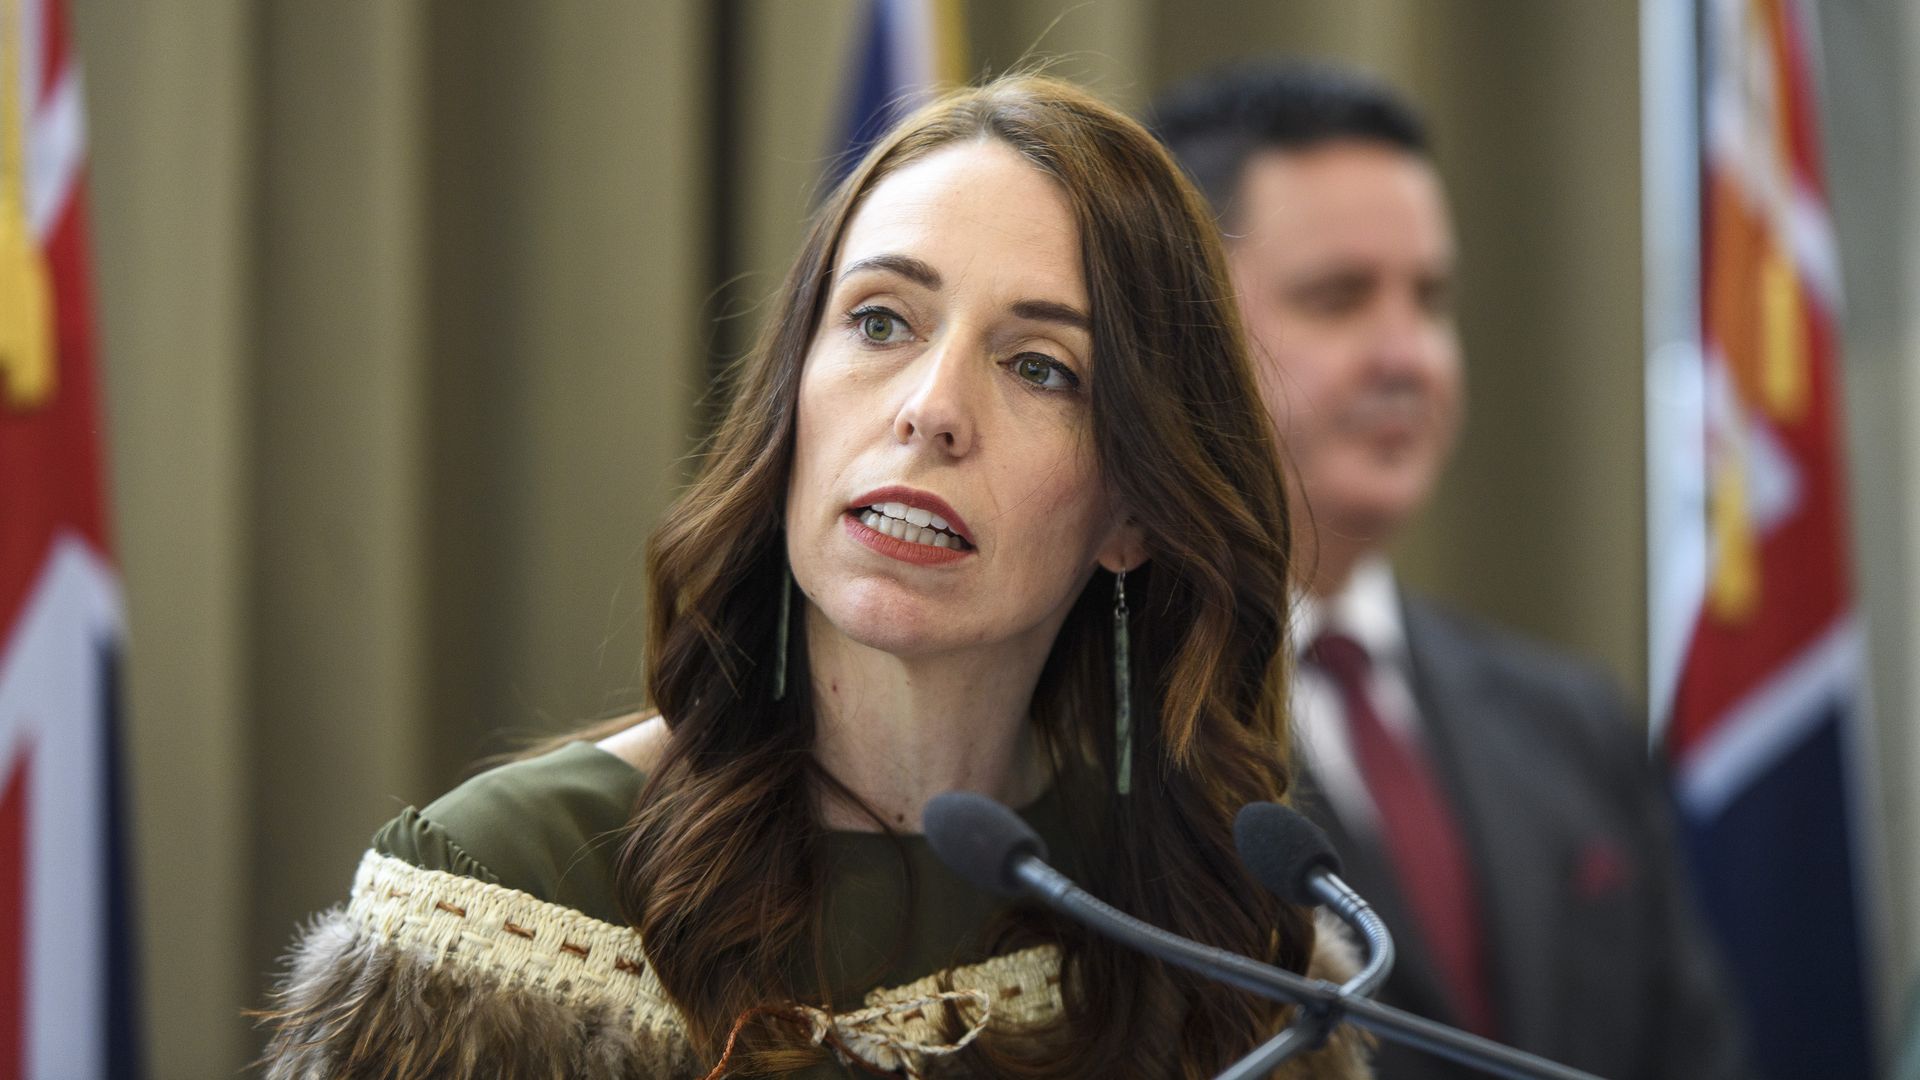 Prime Minister Jacinda Ardern speaks at the Prime Minister's Reception during the opening of New Zealand's 53rd Parliament on November 26, 2020 in Wellington, New Zealand. 